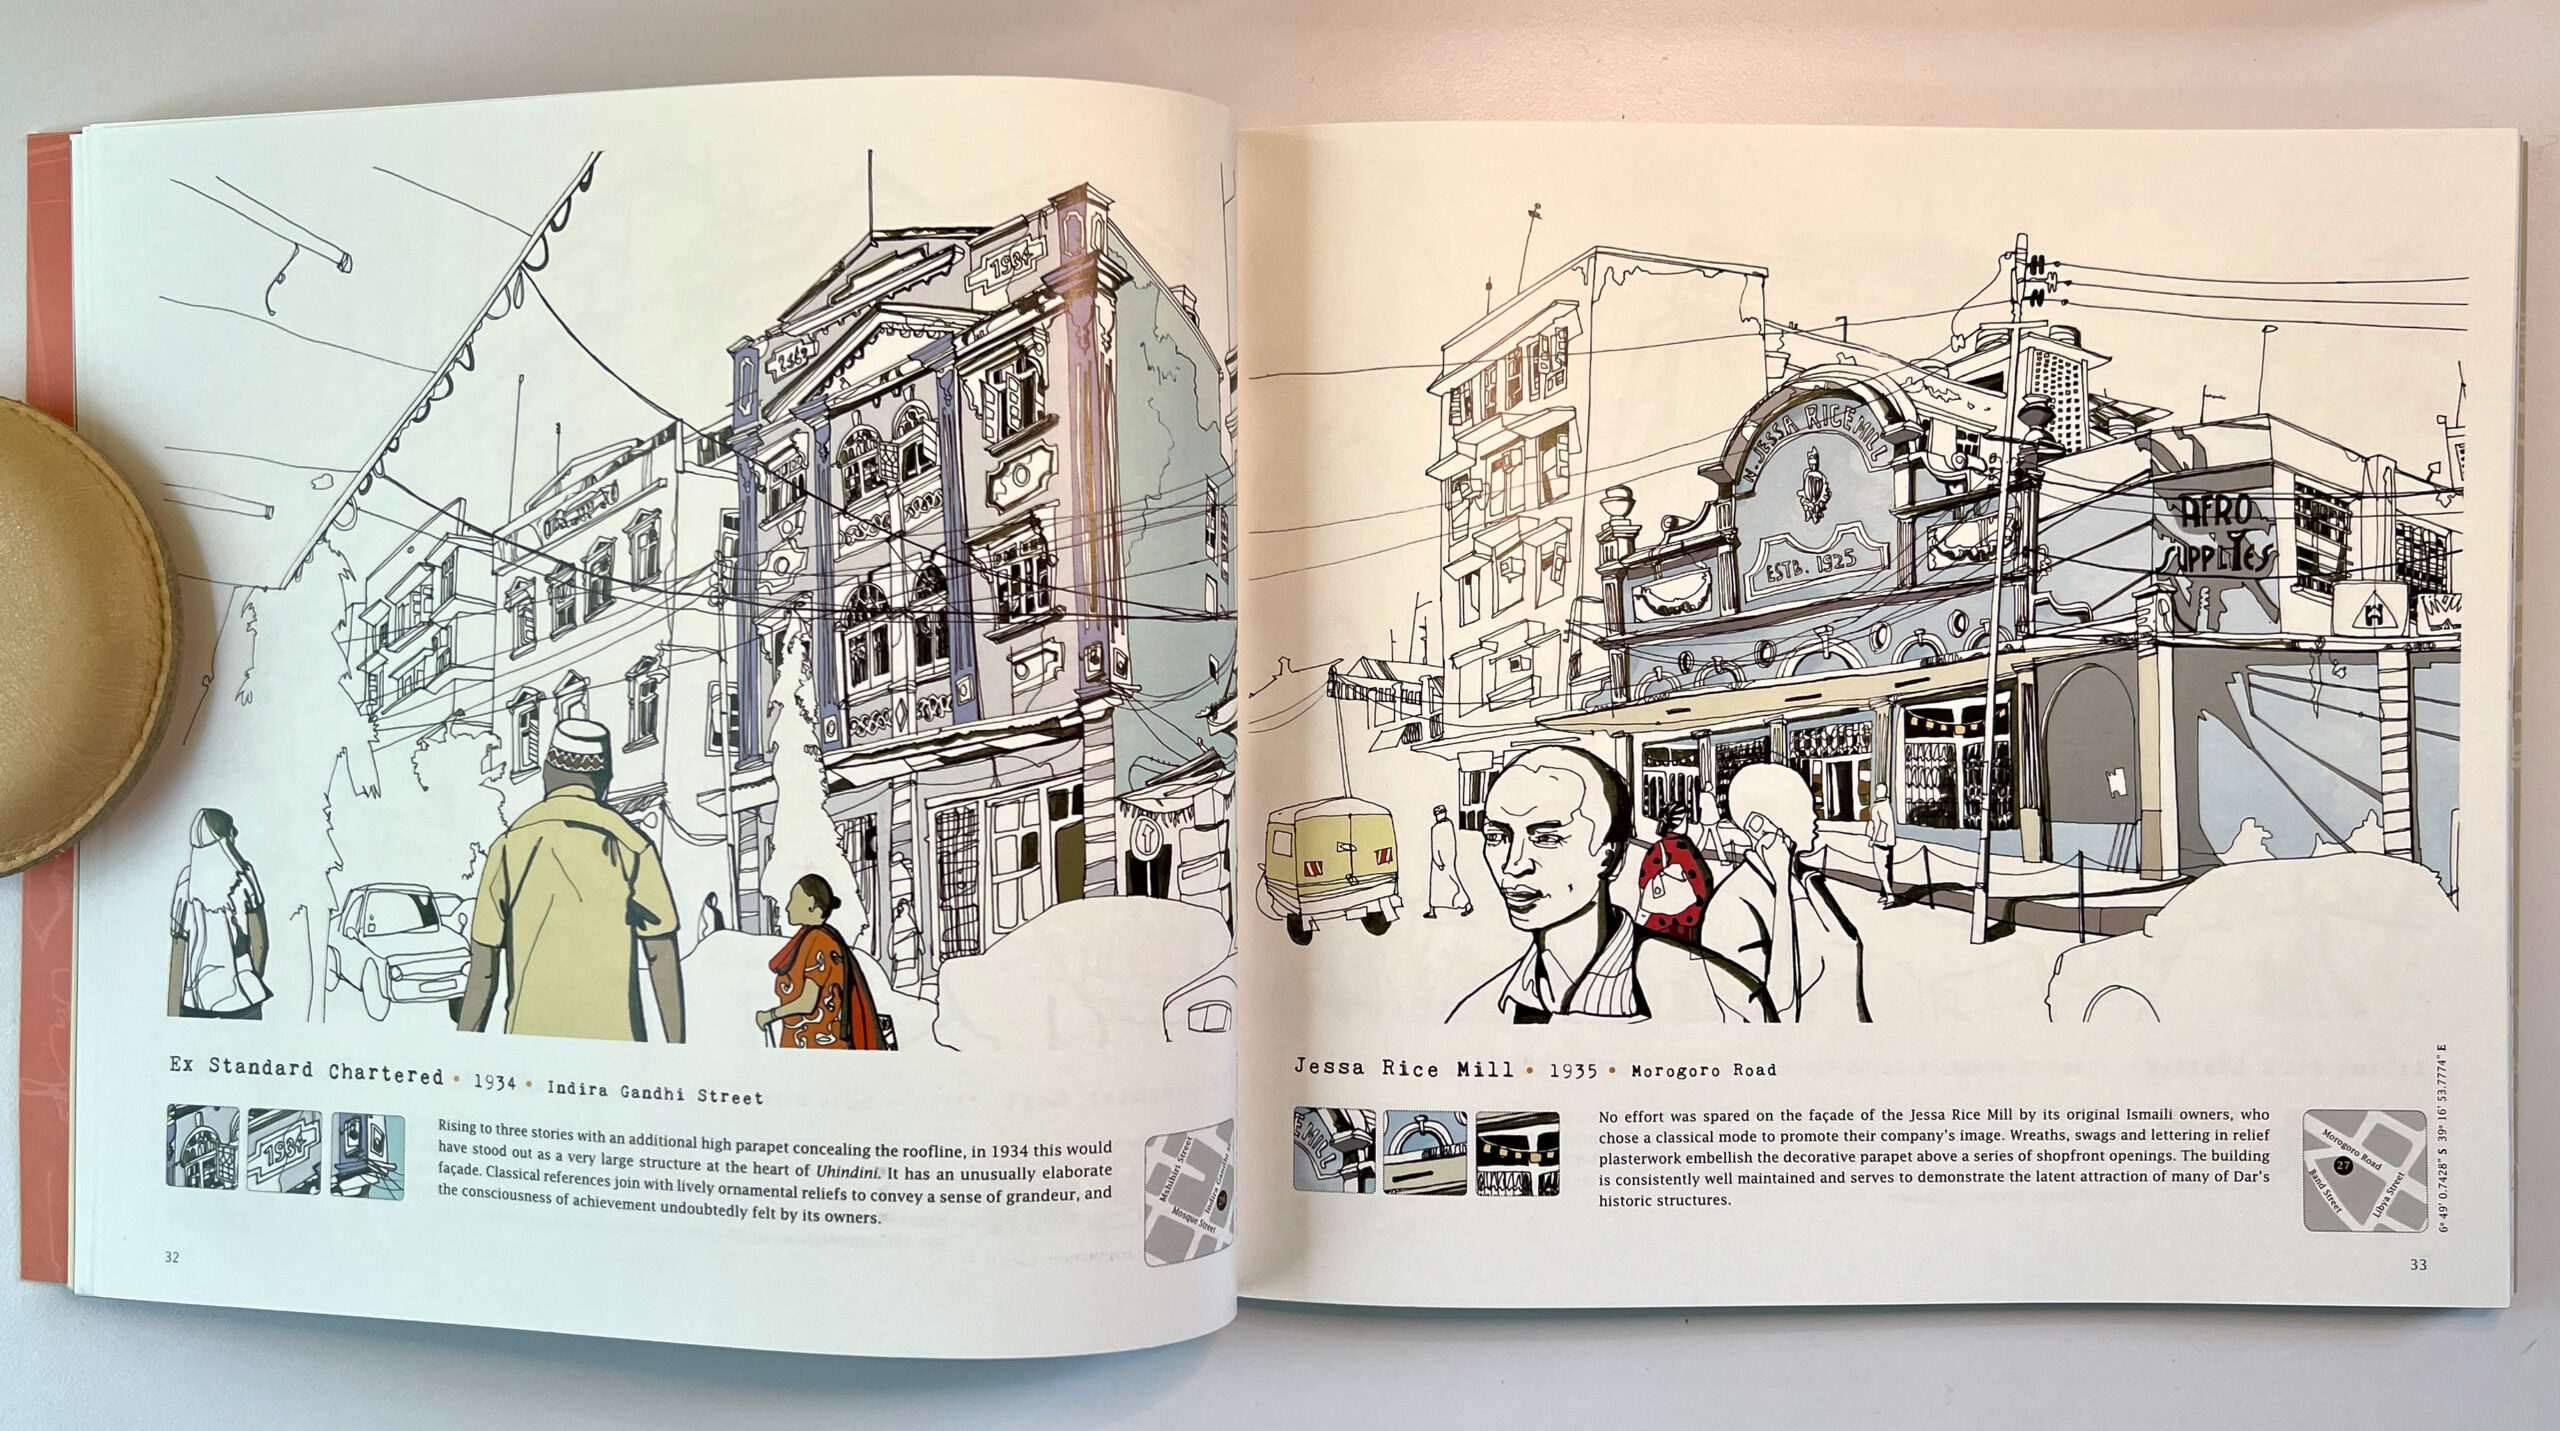 Samples of urban sketches from Street Level